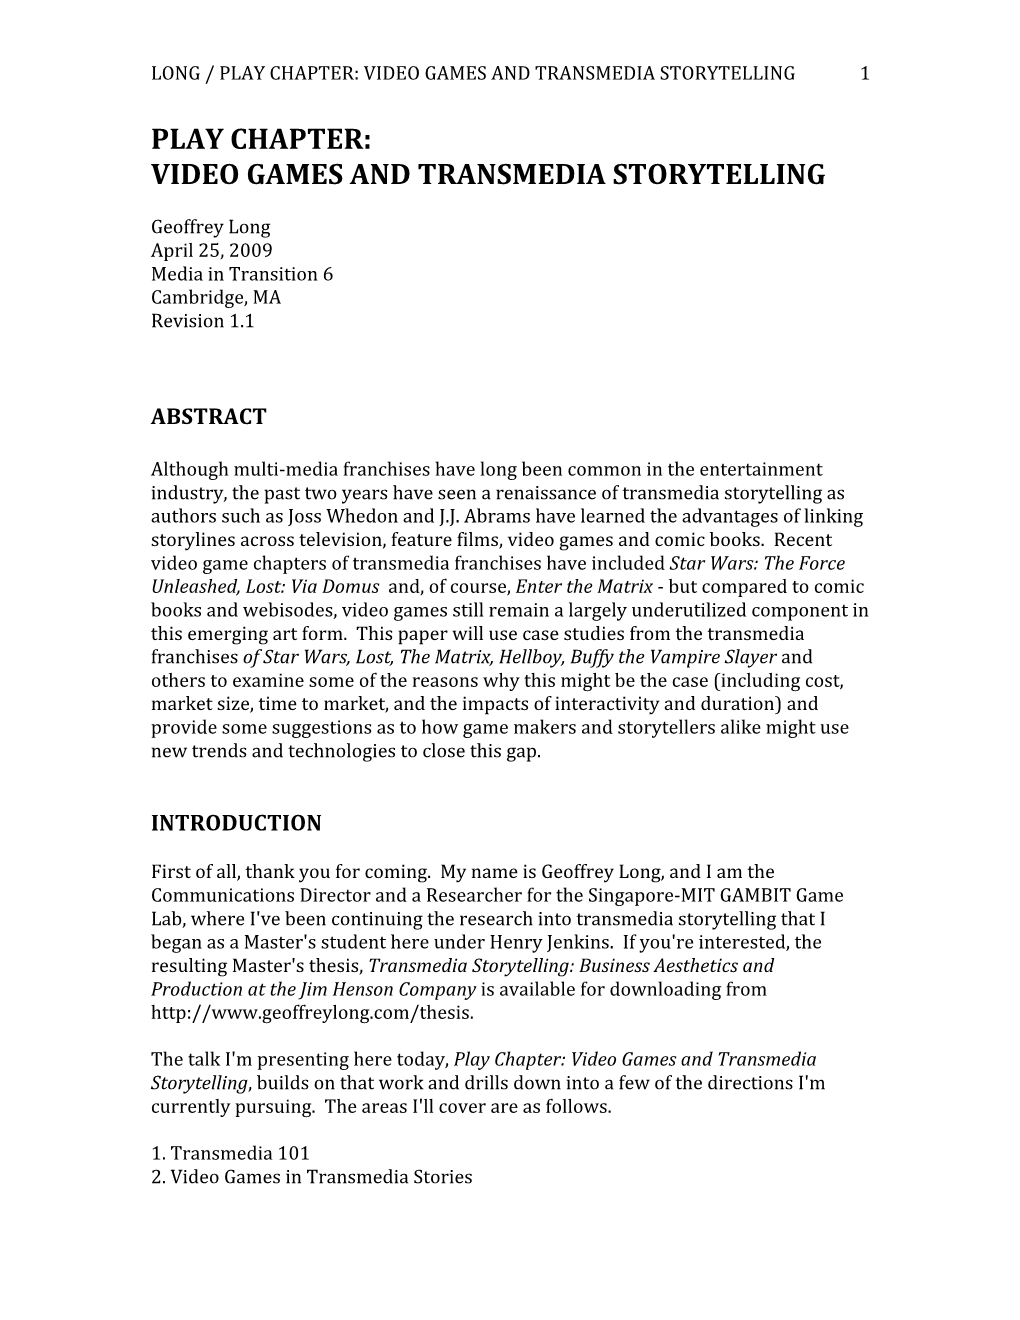 Play Chapter: Video Games and Transmedia Storytelling 1